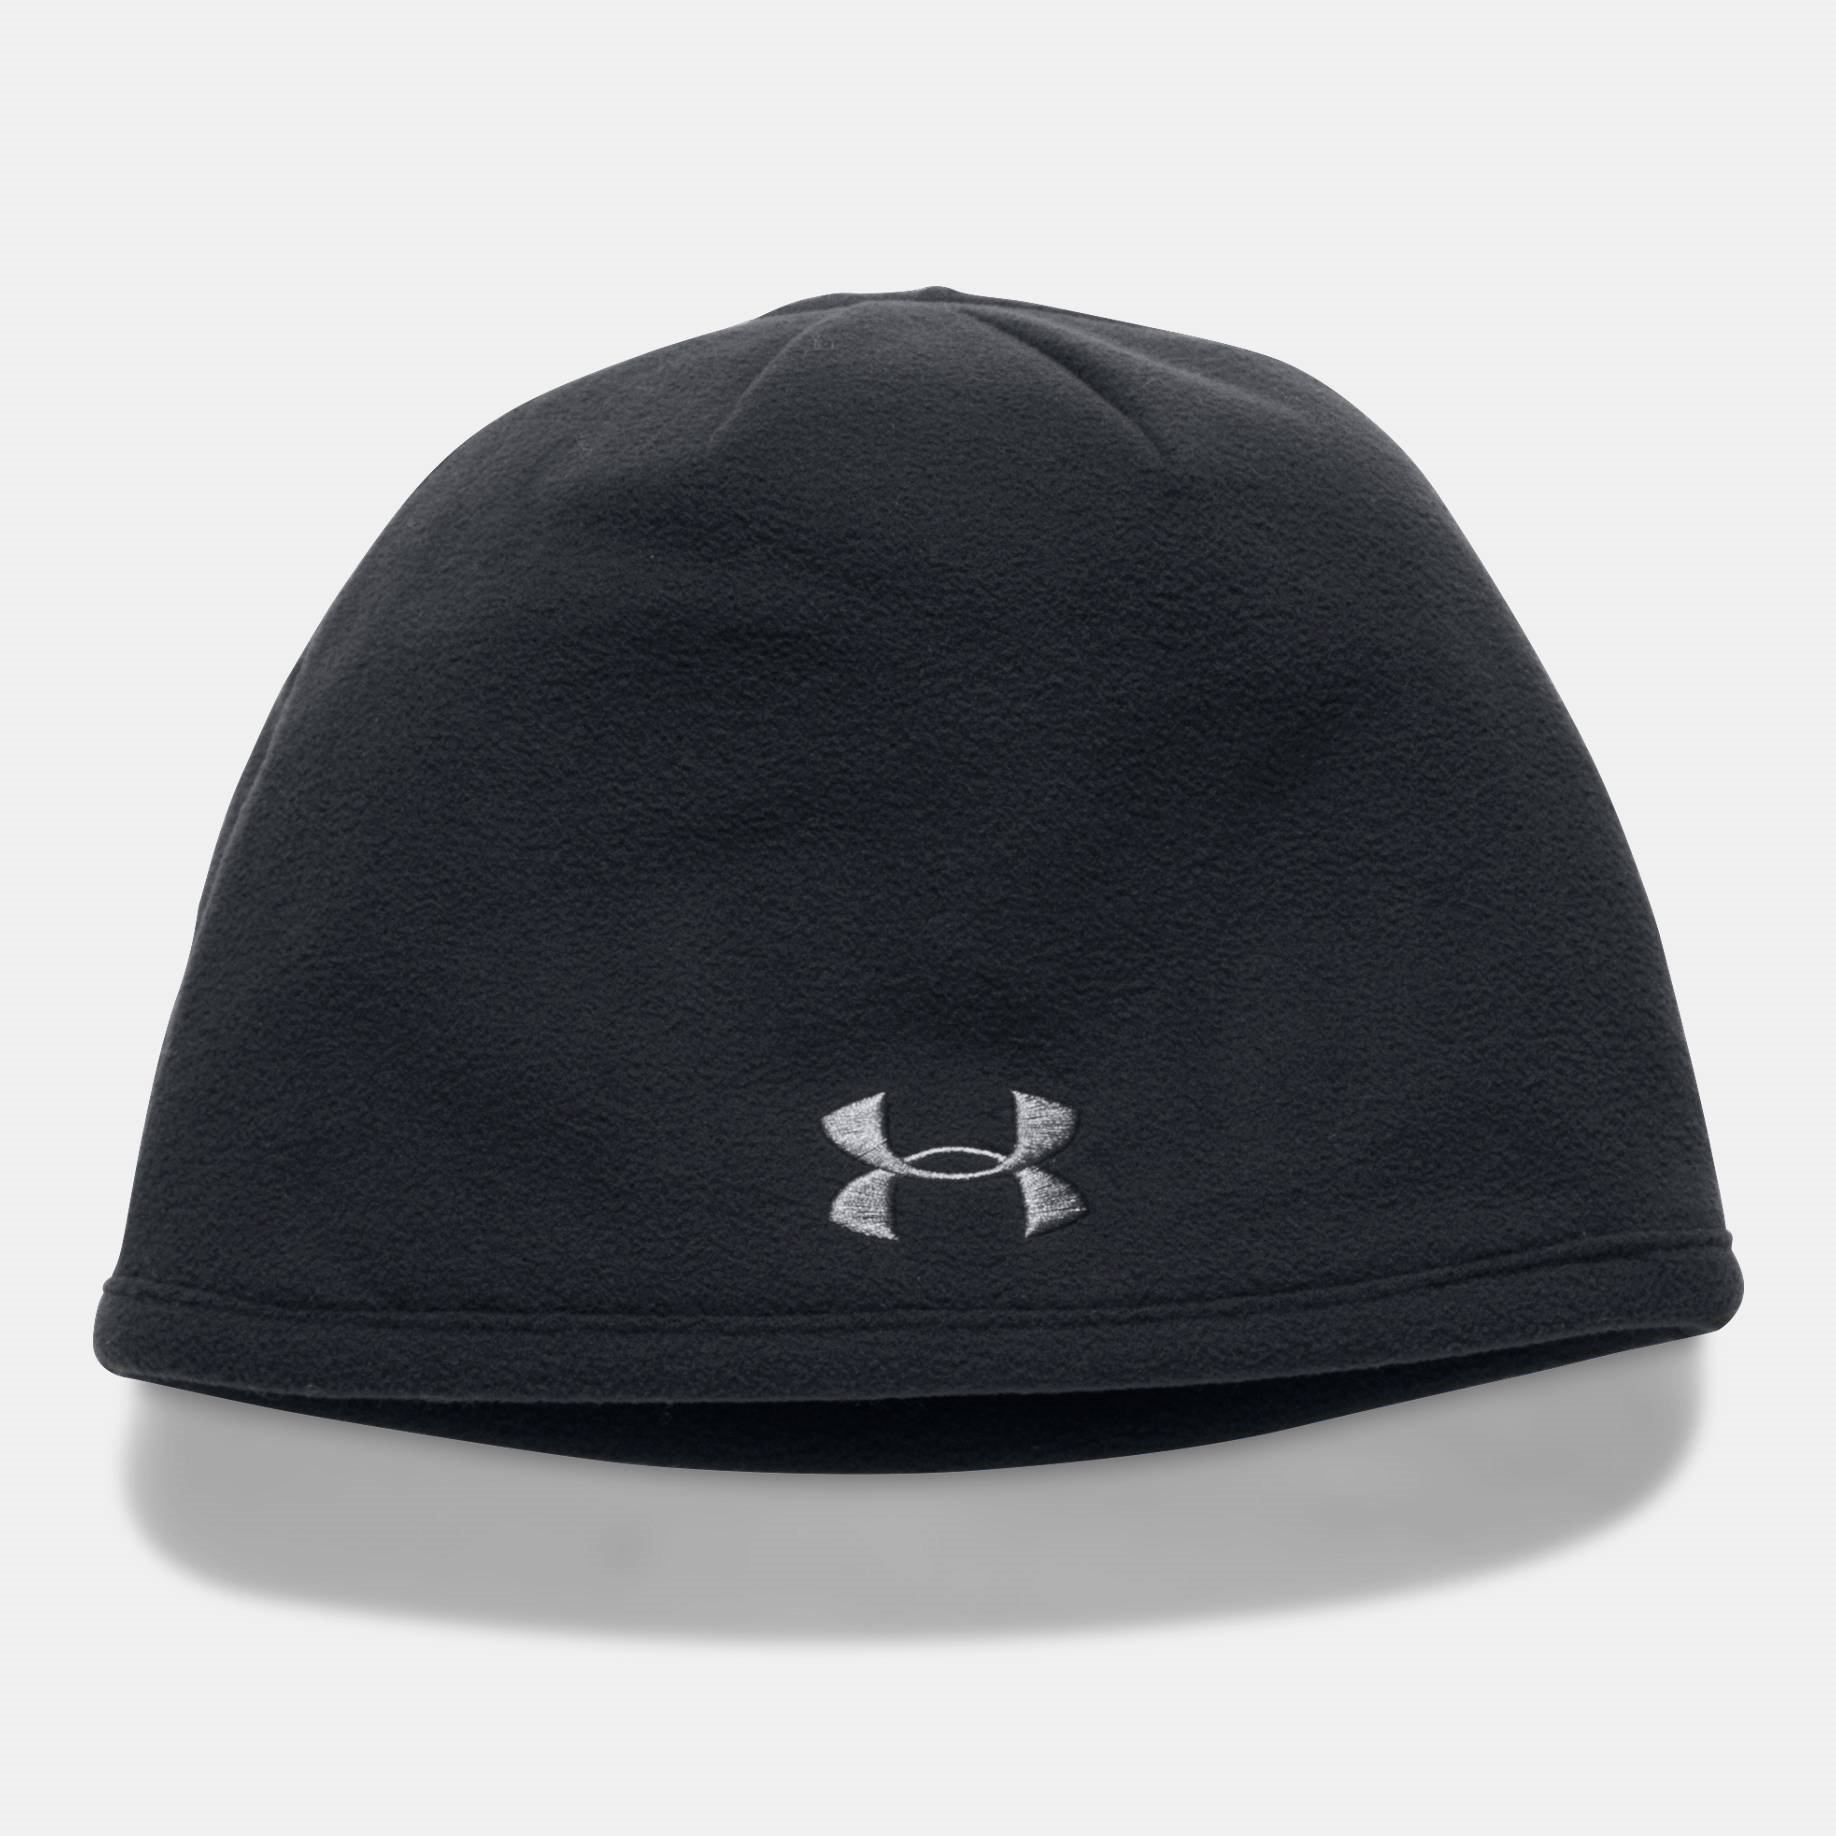 I lost my way harpoon license Hats | Accessories | Under armour ColdGear Infrared Beanie 0837 | Fitness